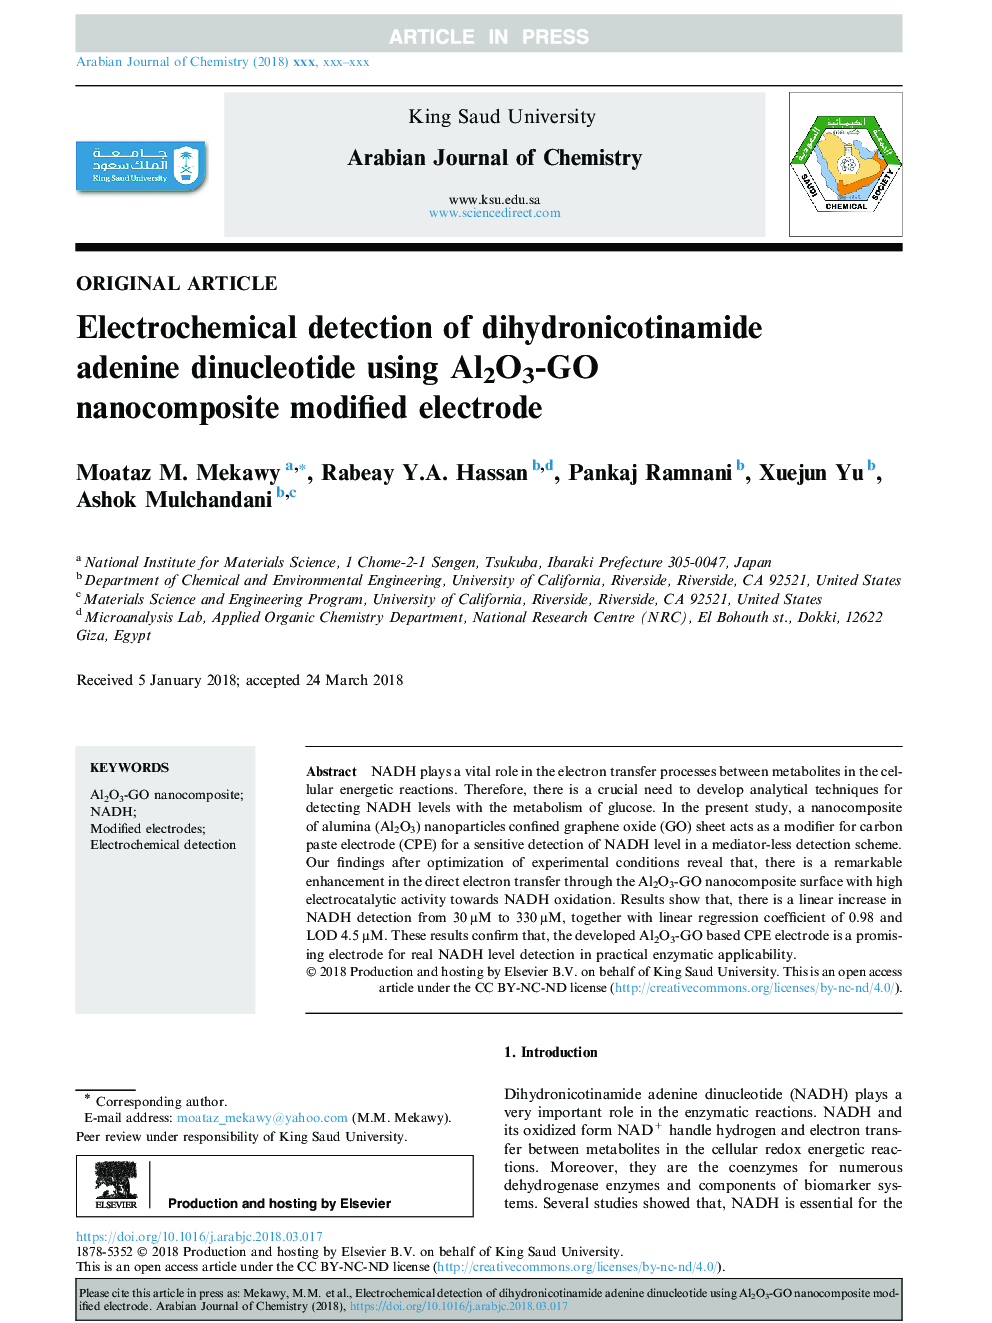 Electrochemical detection of dihydronicotinamide adenine dinucleotide using Al2O3-GO nanocomposite modified electrode